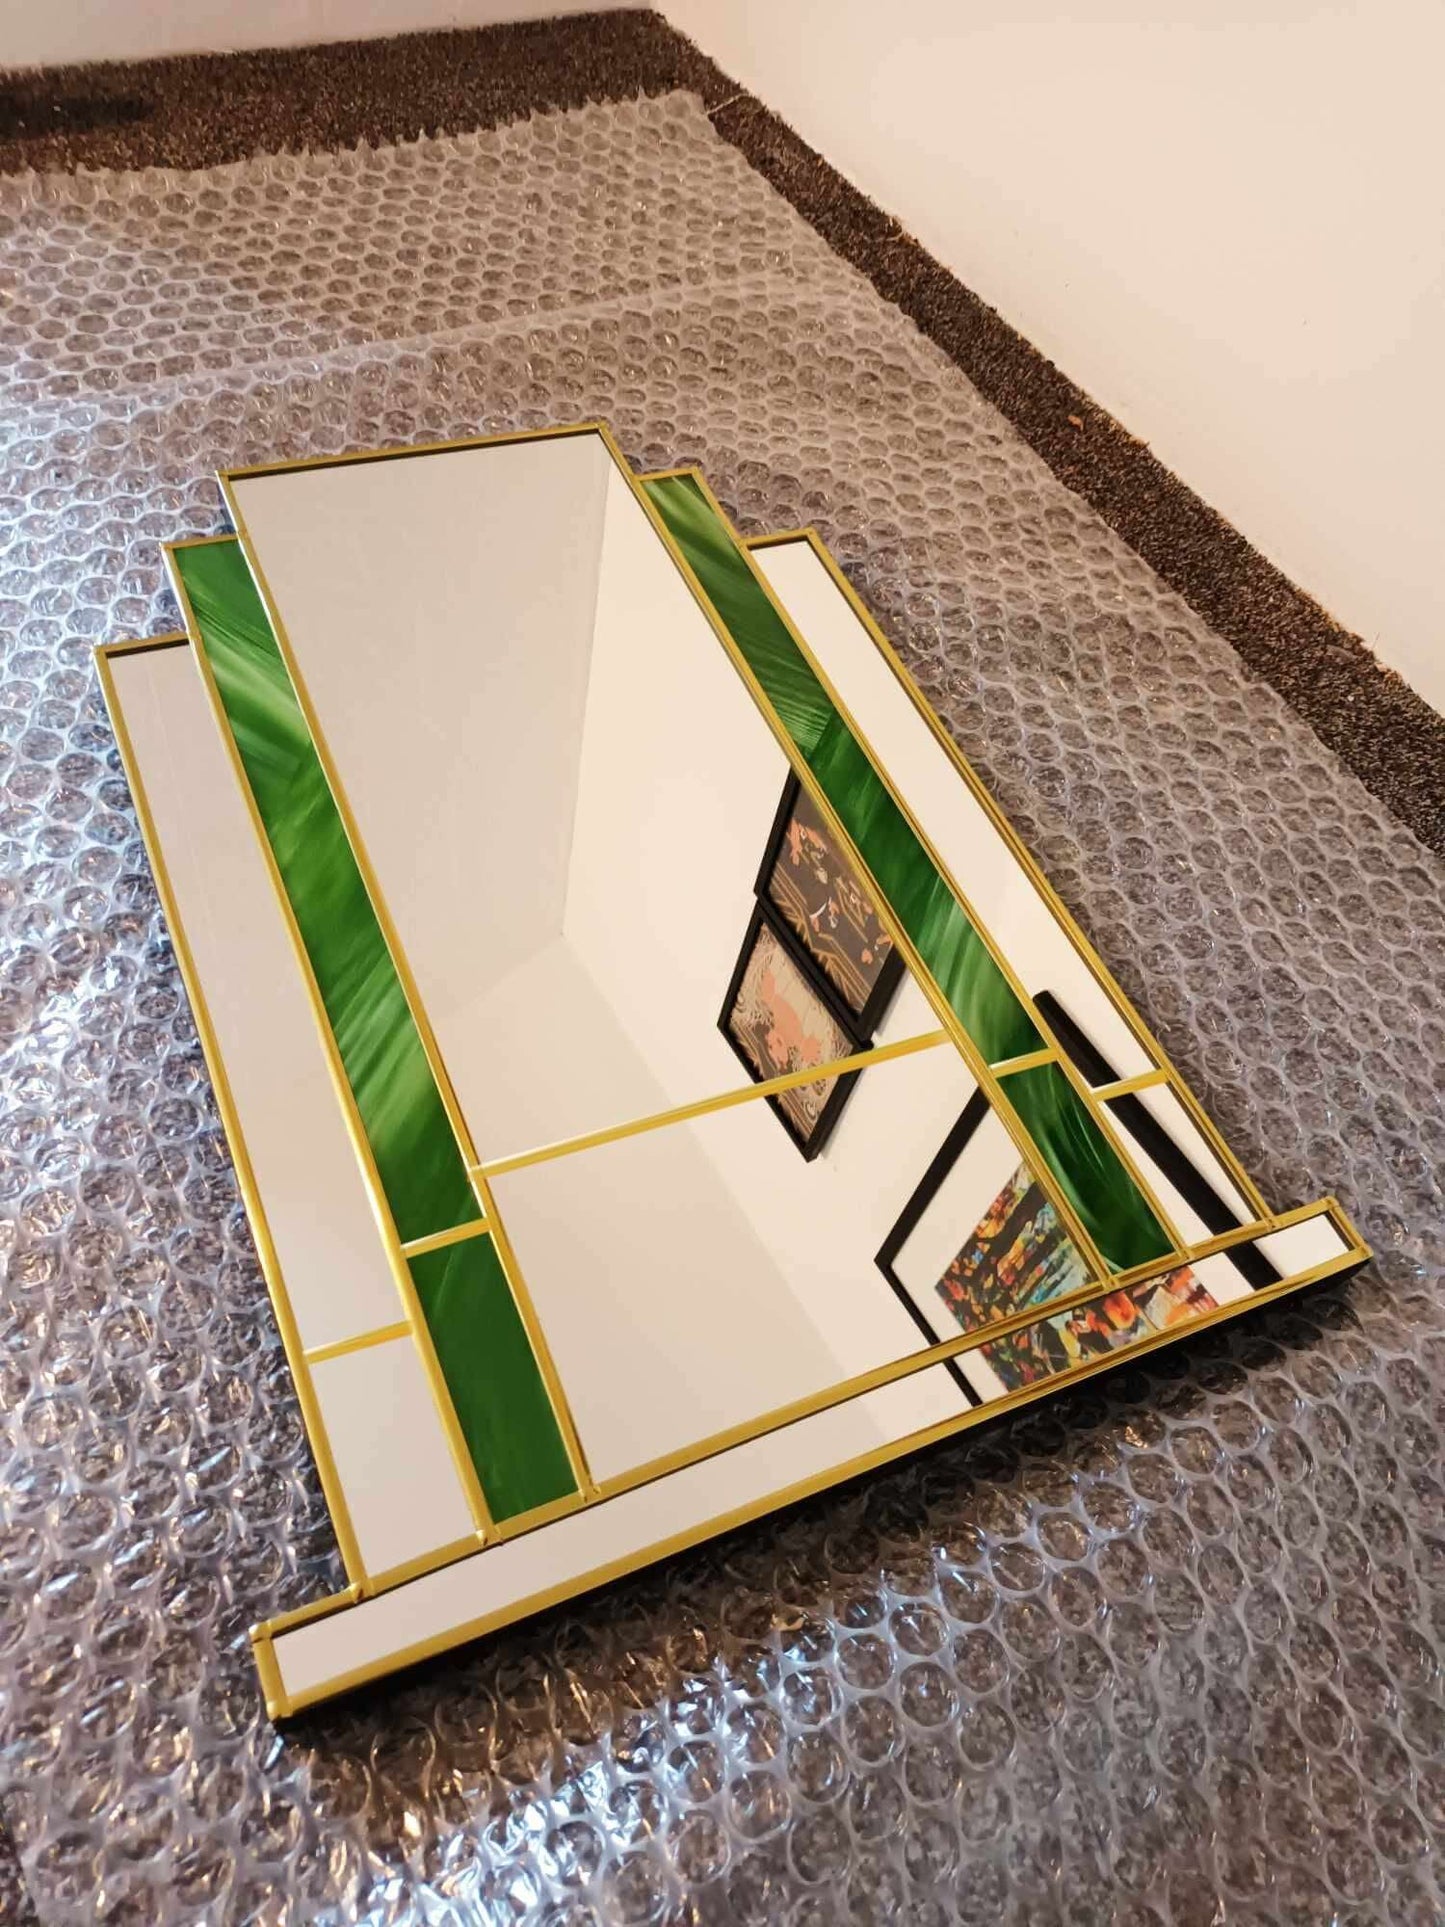 The Omega Brass and Green Stain Glass Style Art Deco Mirror